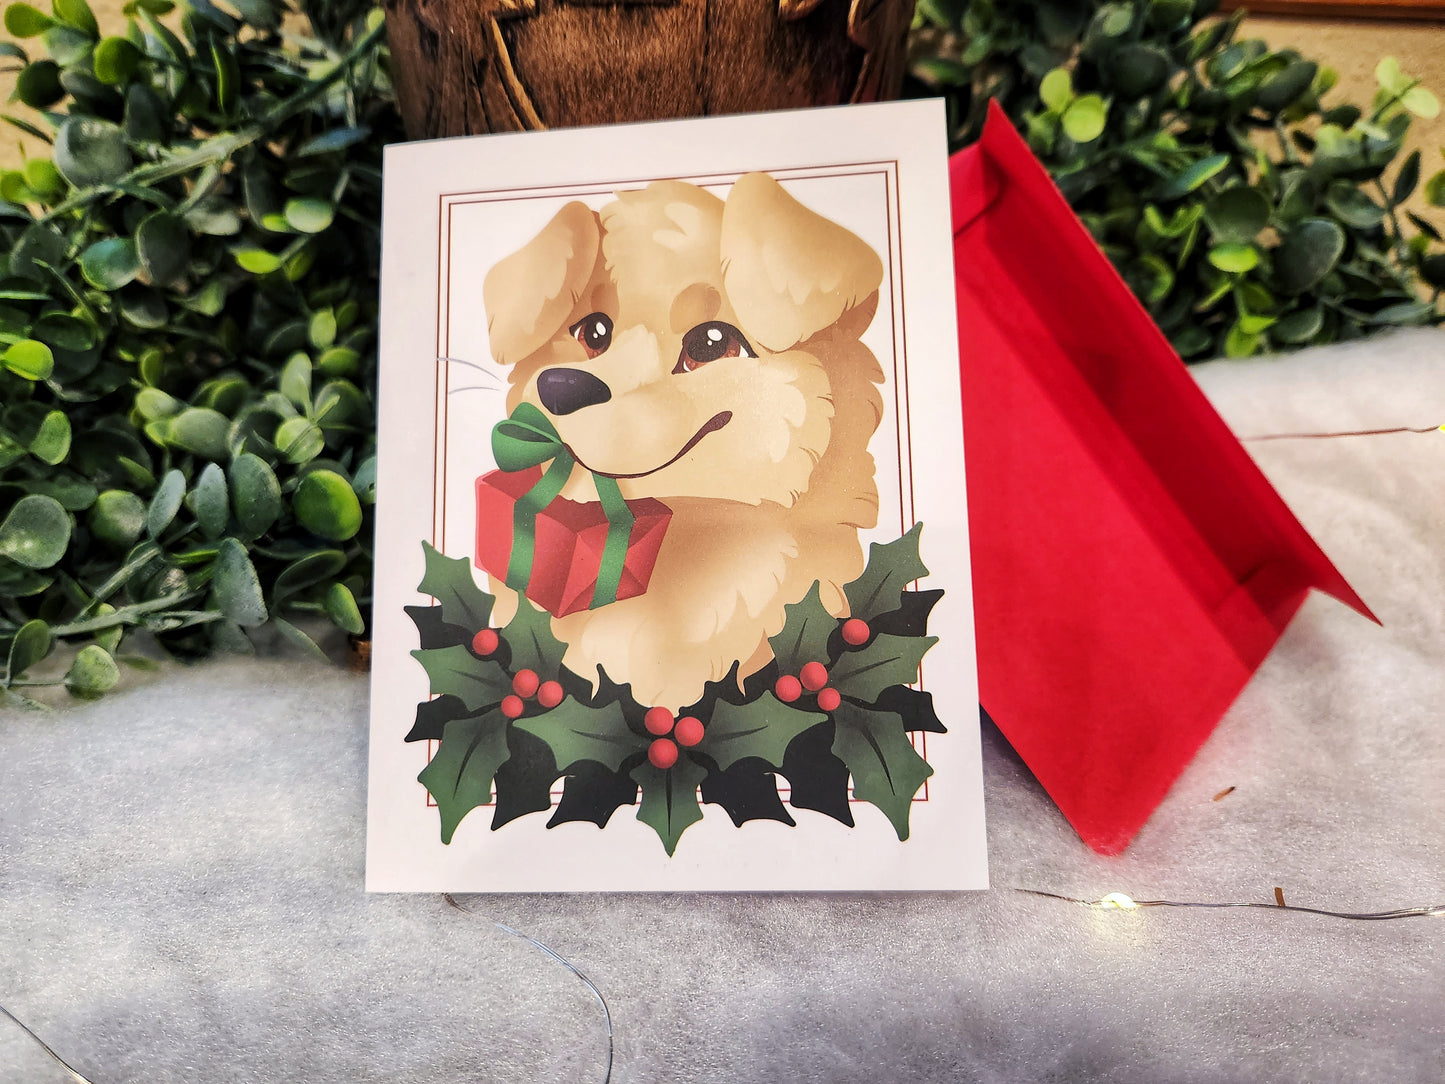 Perfect Package - Holiday Greeting Card